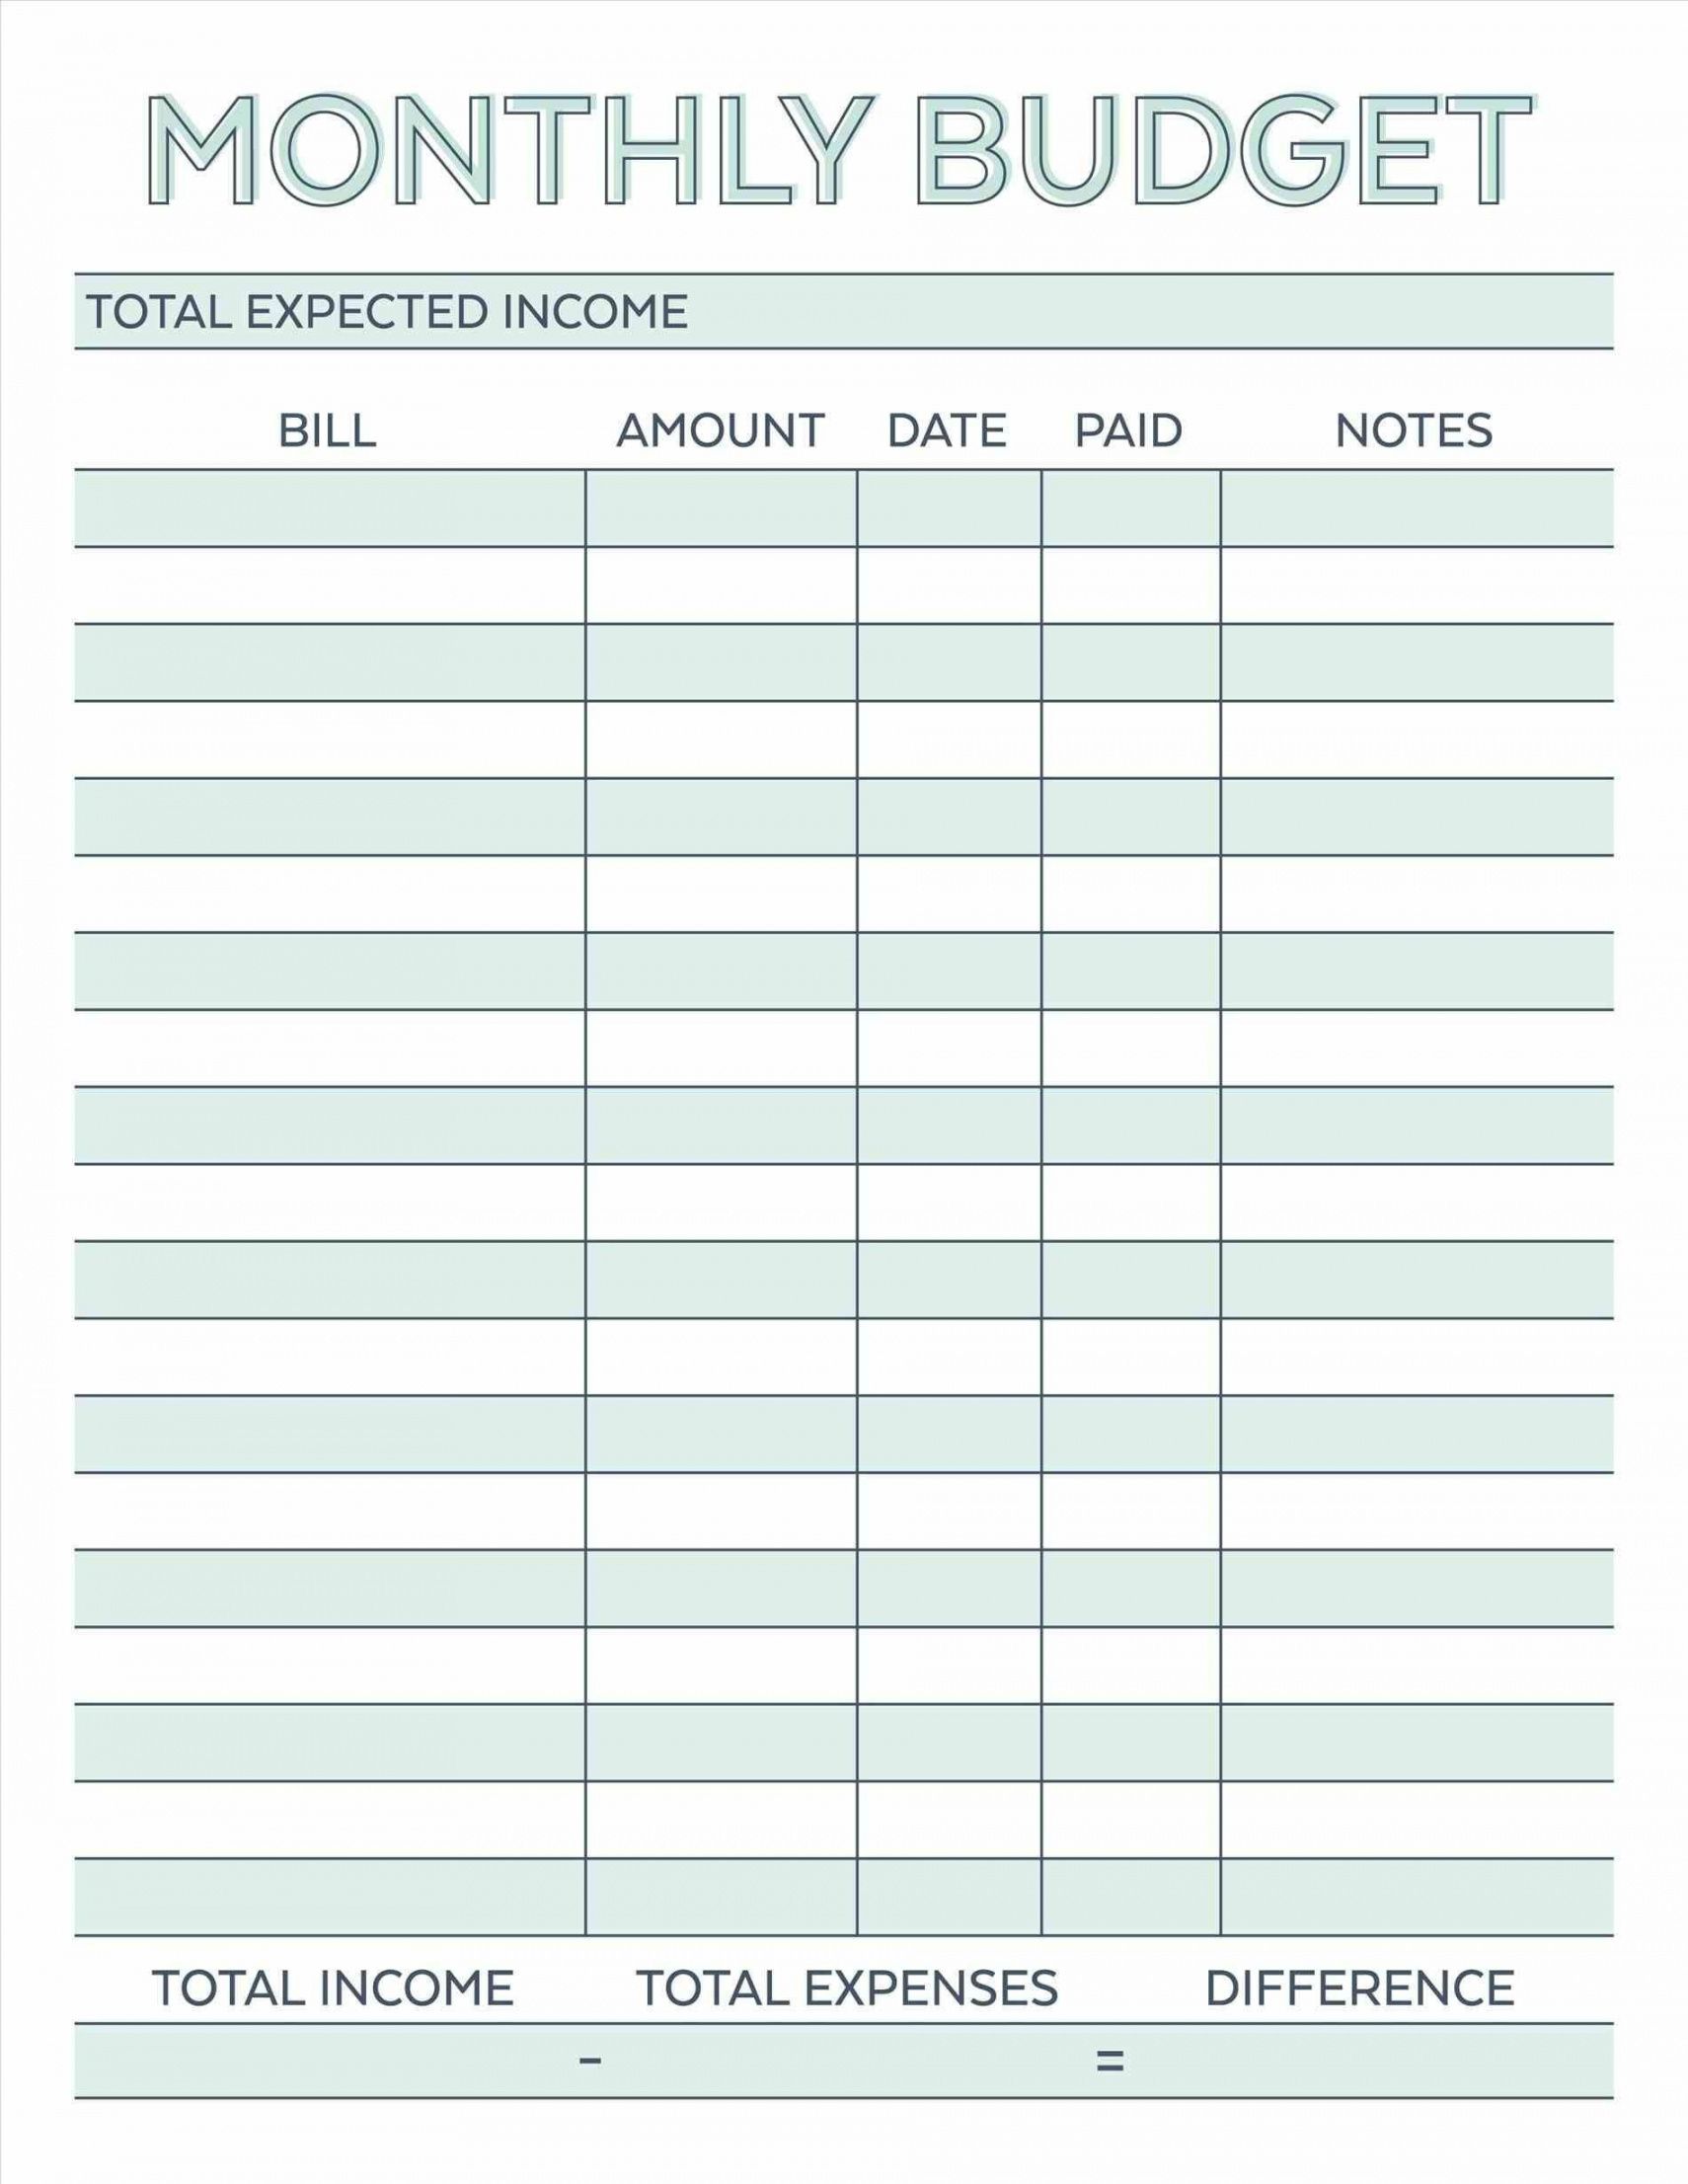 blank monthly budget worksheet  frugal fanatic  free monthly budget planner template printable